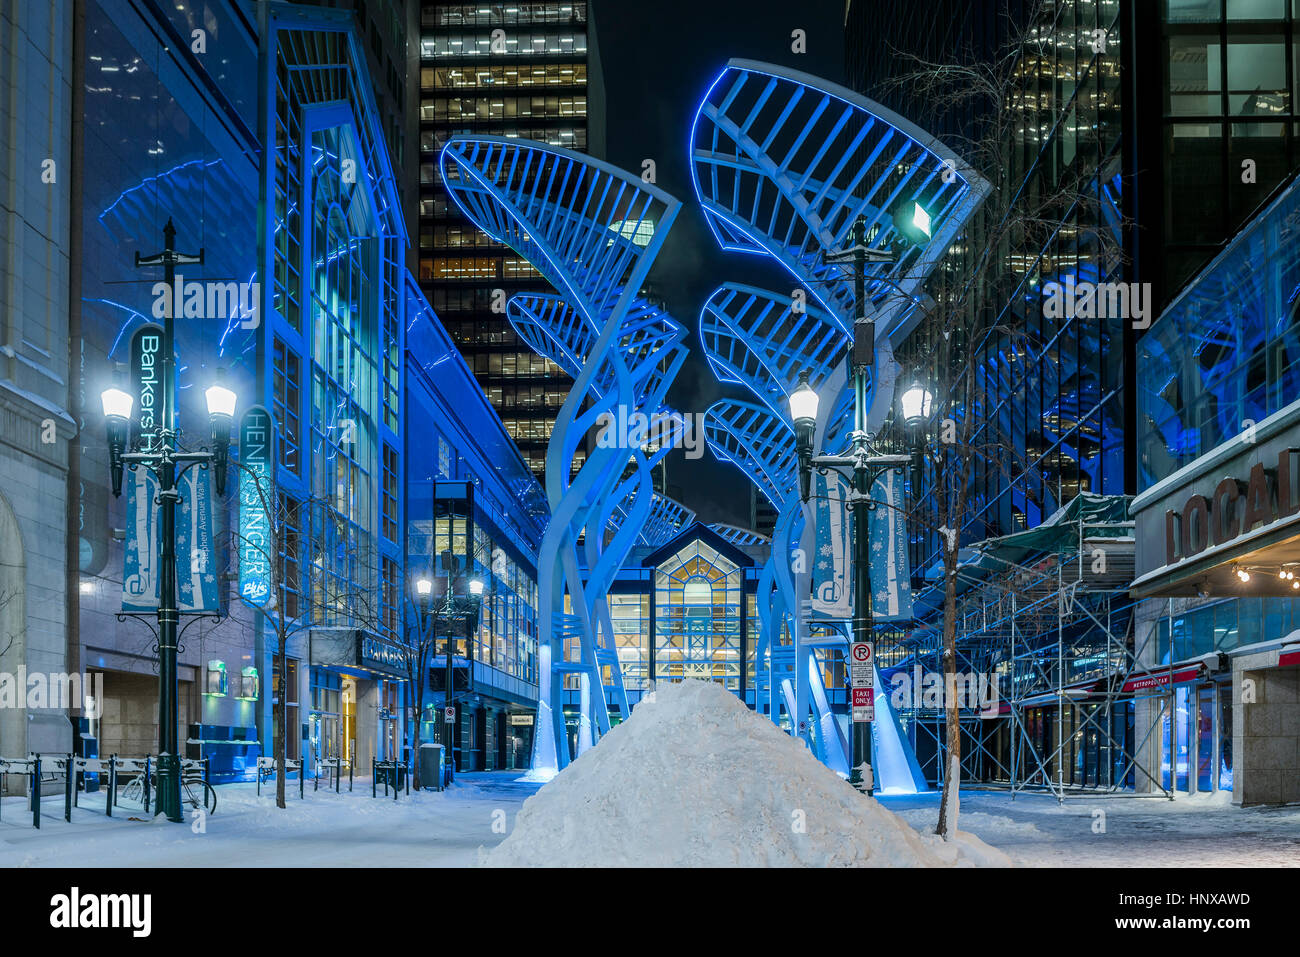 "Trees" sculpture on Stephen Avenue,  designed to reduce wind gusts between the buildings, Calgary, Alberta, Canada Stock Photo